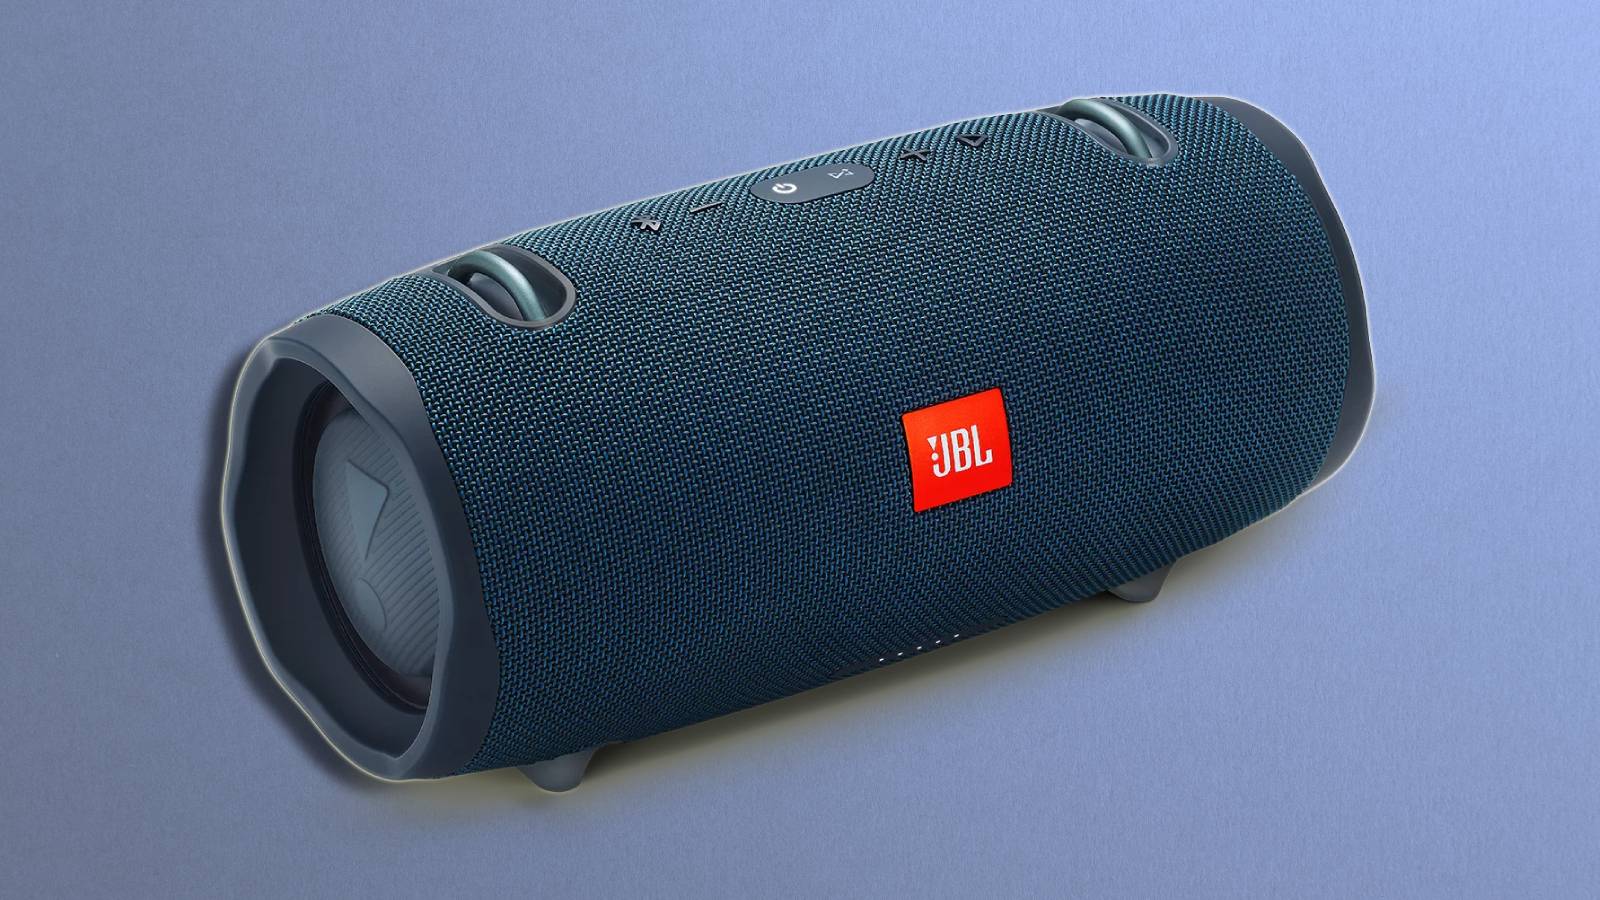 Save $150 on JBL's incredible Xtreme 2 wireless Bluetooth speaker